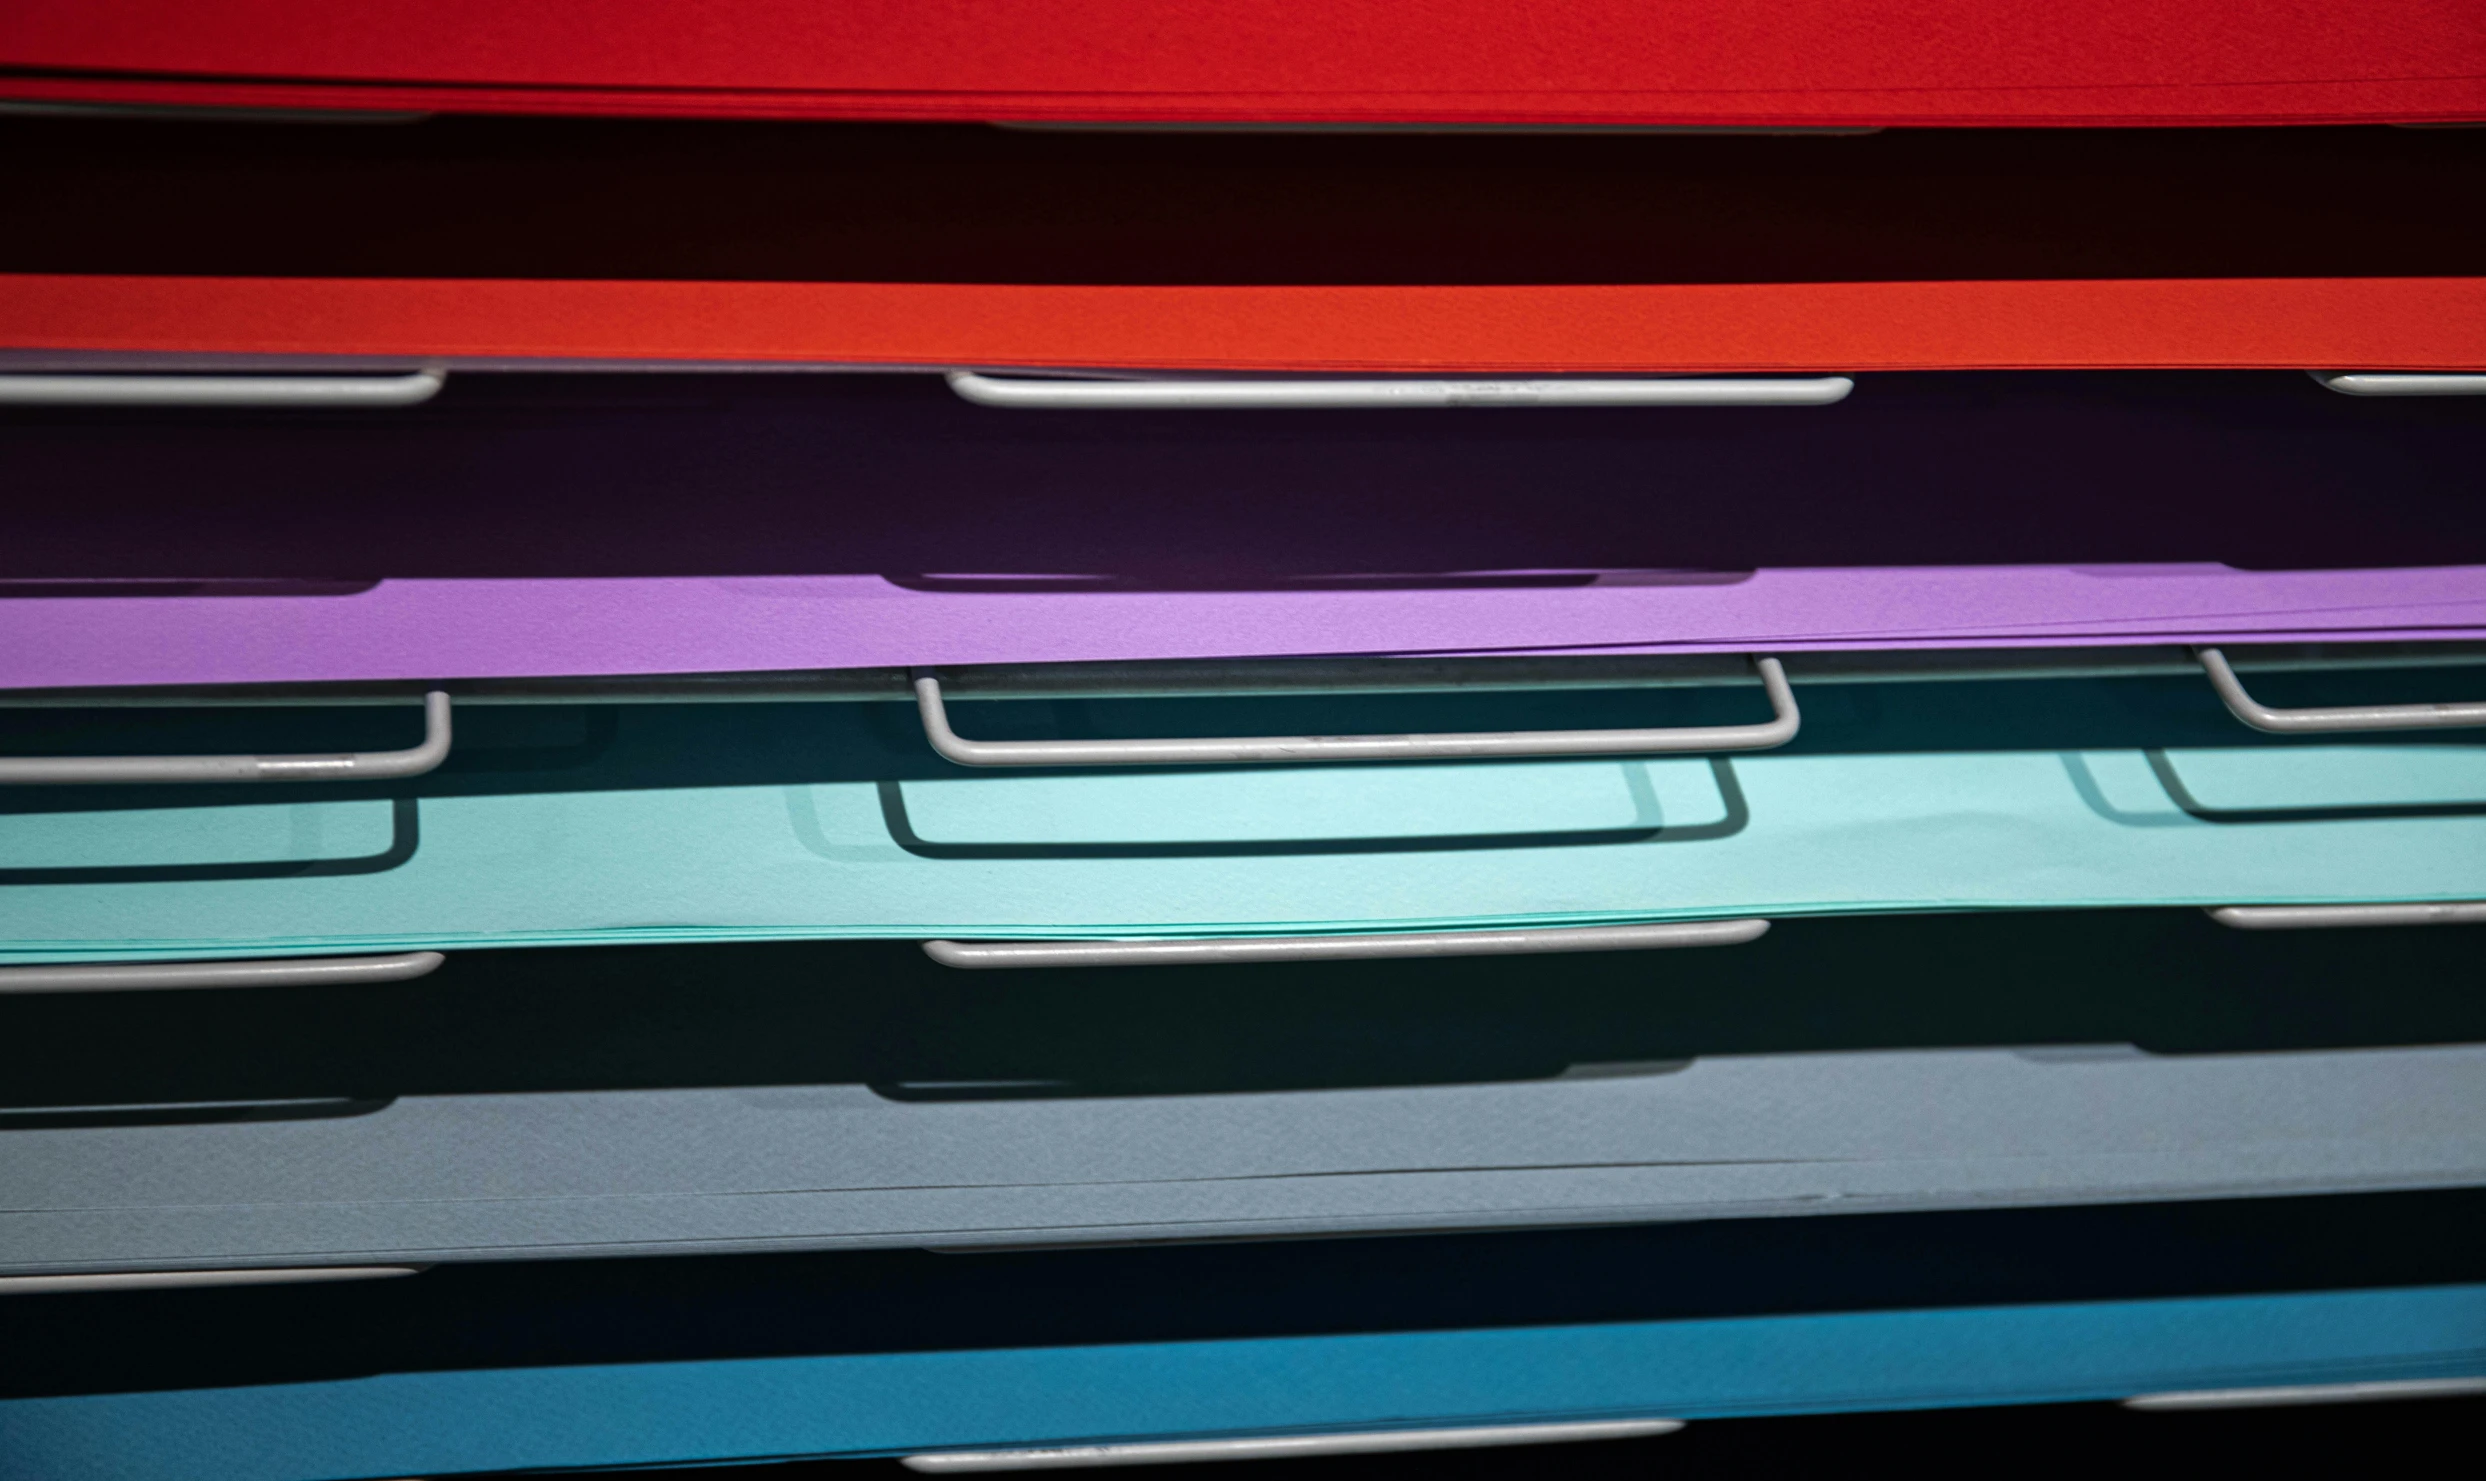 a bunch of folders stacked on top of each other, inspired by Donald Judd, unsplash, color field, metal handles, mauve and cinnabar and cyan, textured plastic, bottom body close up